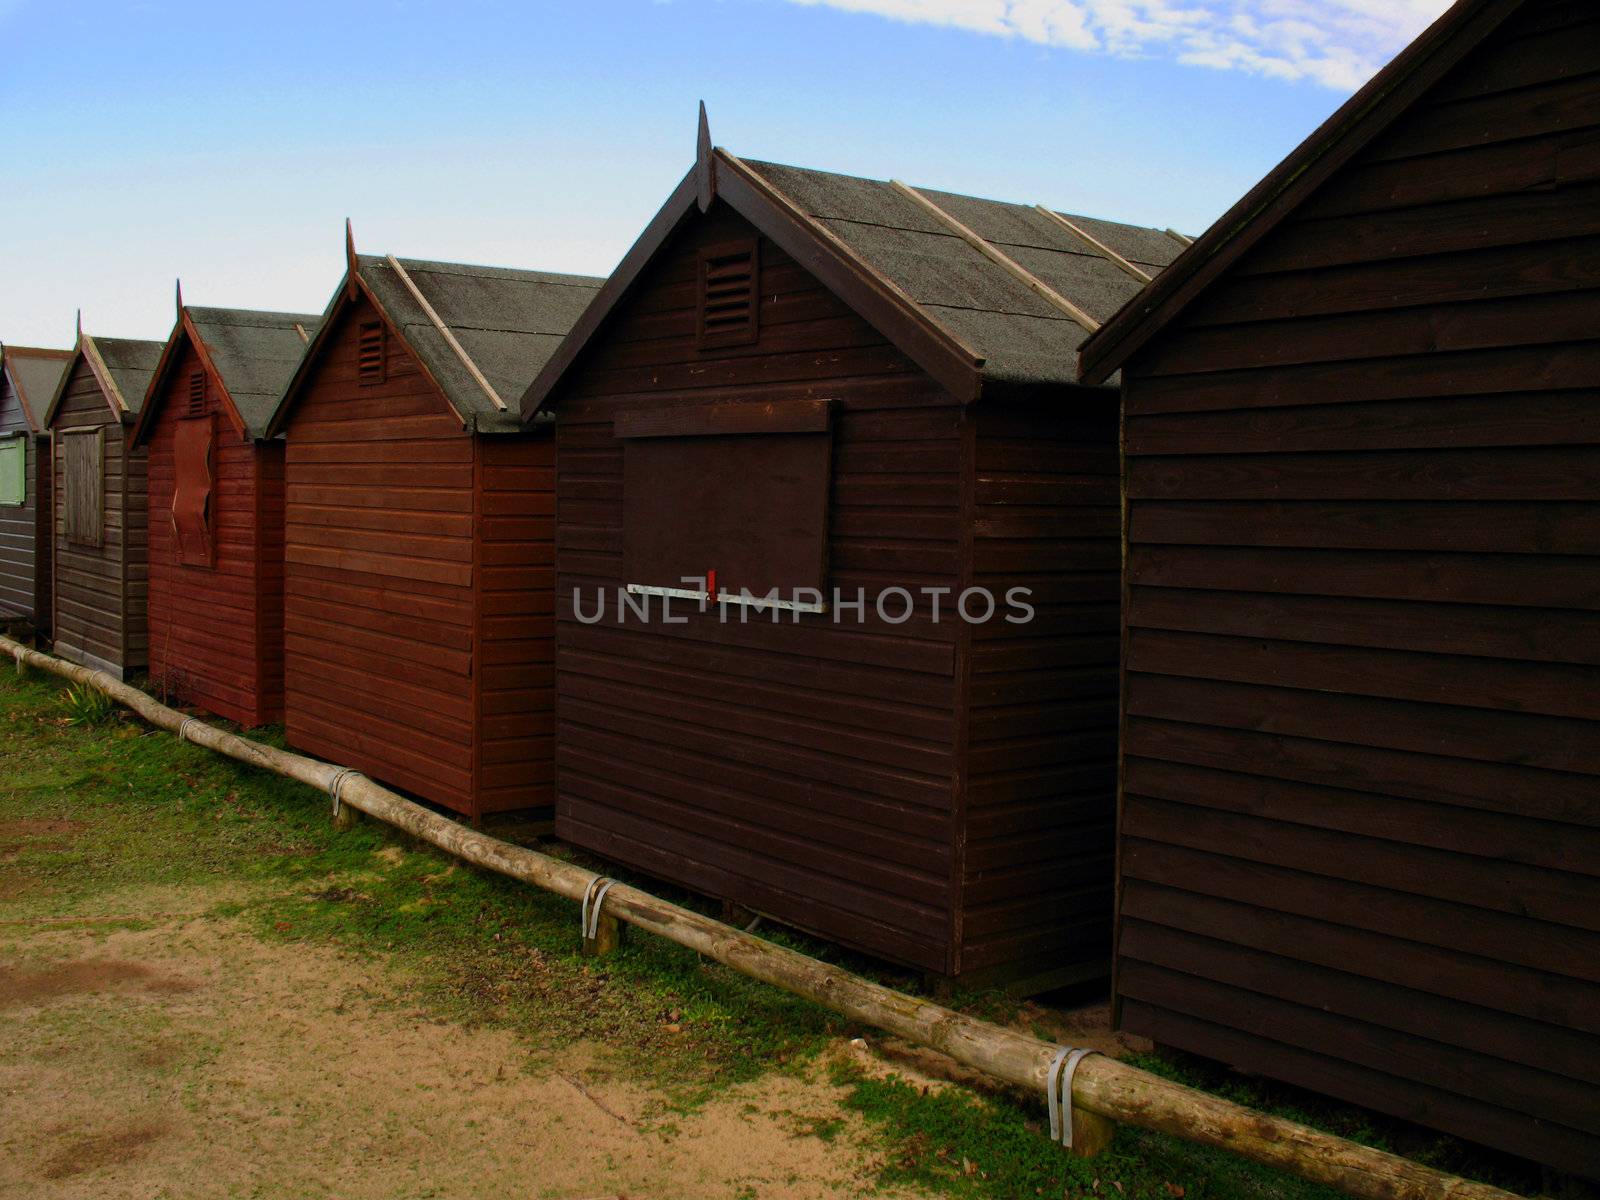 Close view of row of beach huts on sand dunes. Deserted during the winter months.